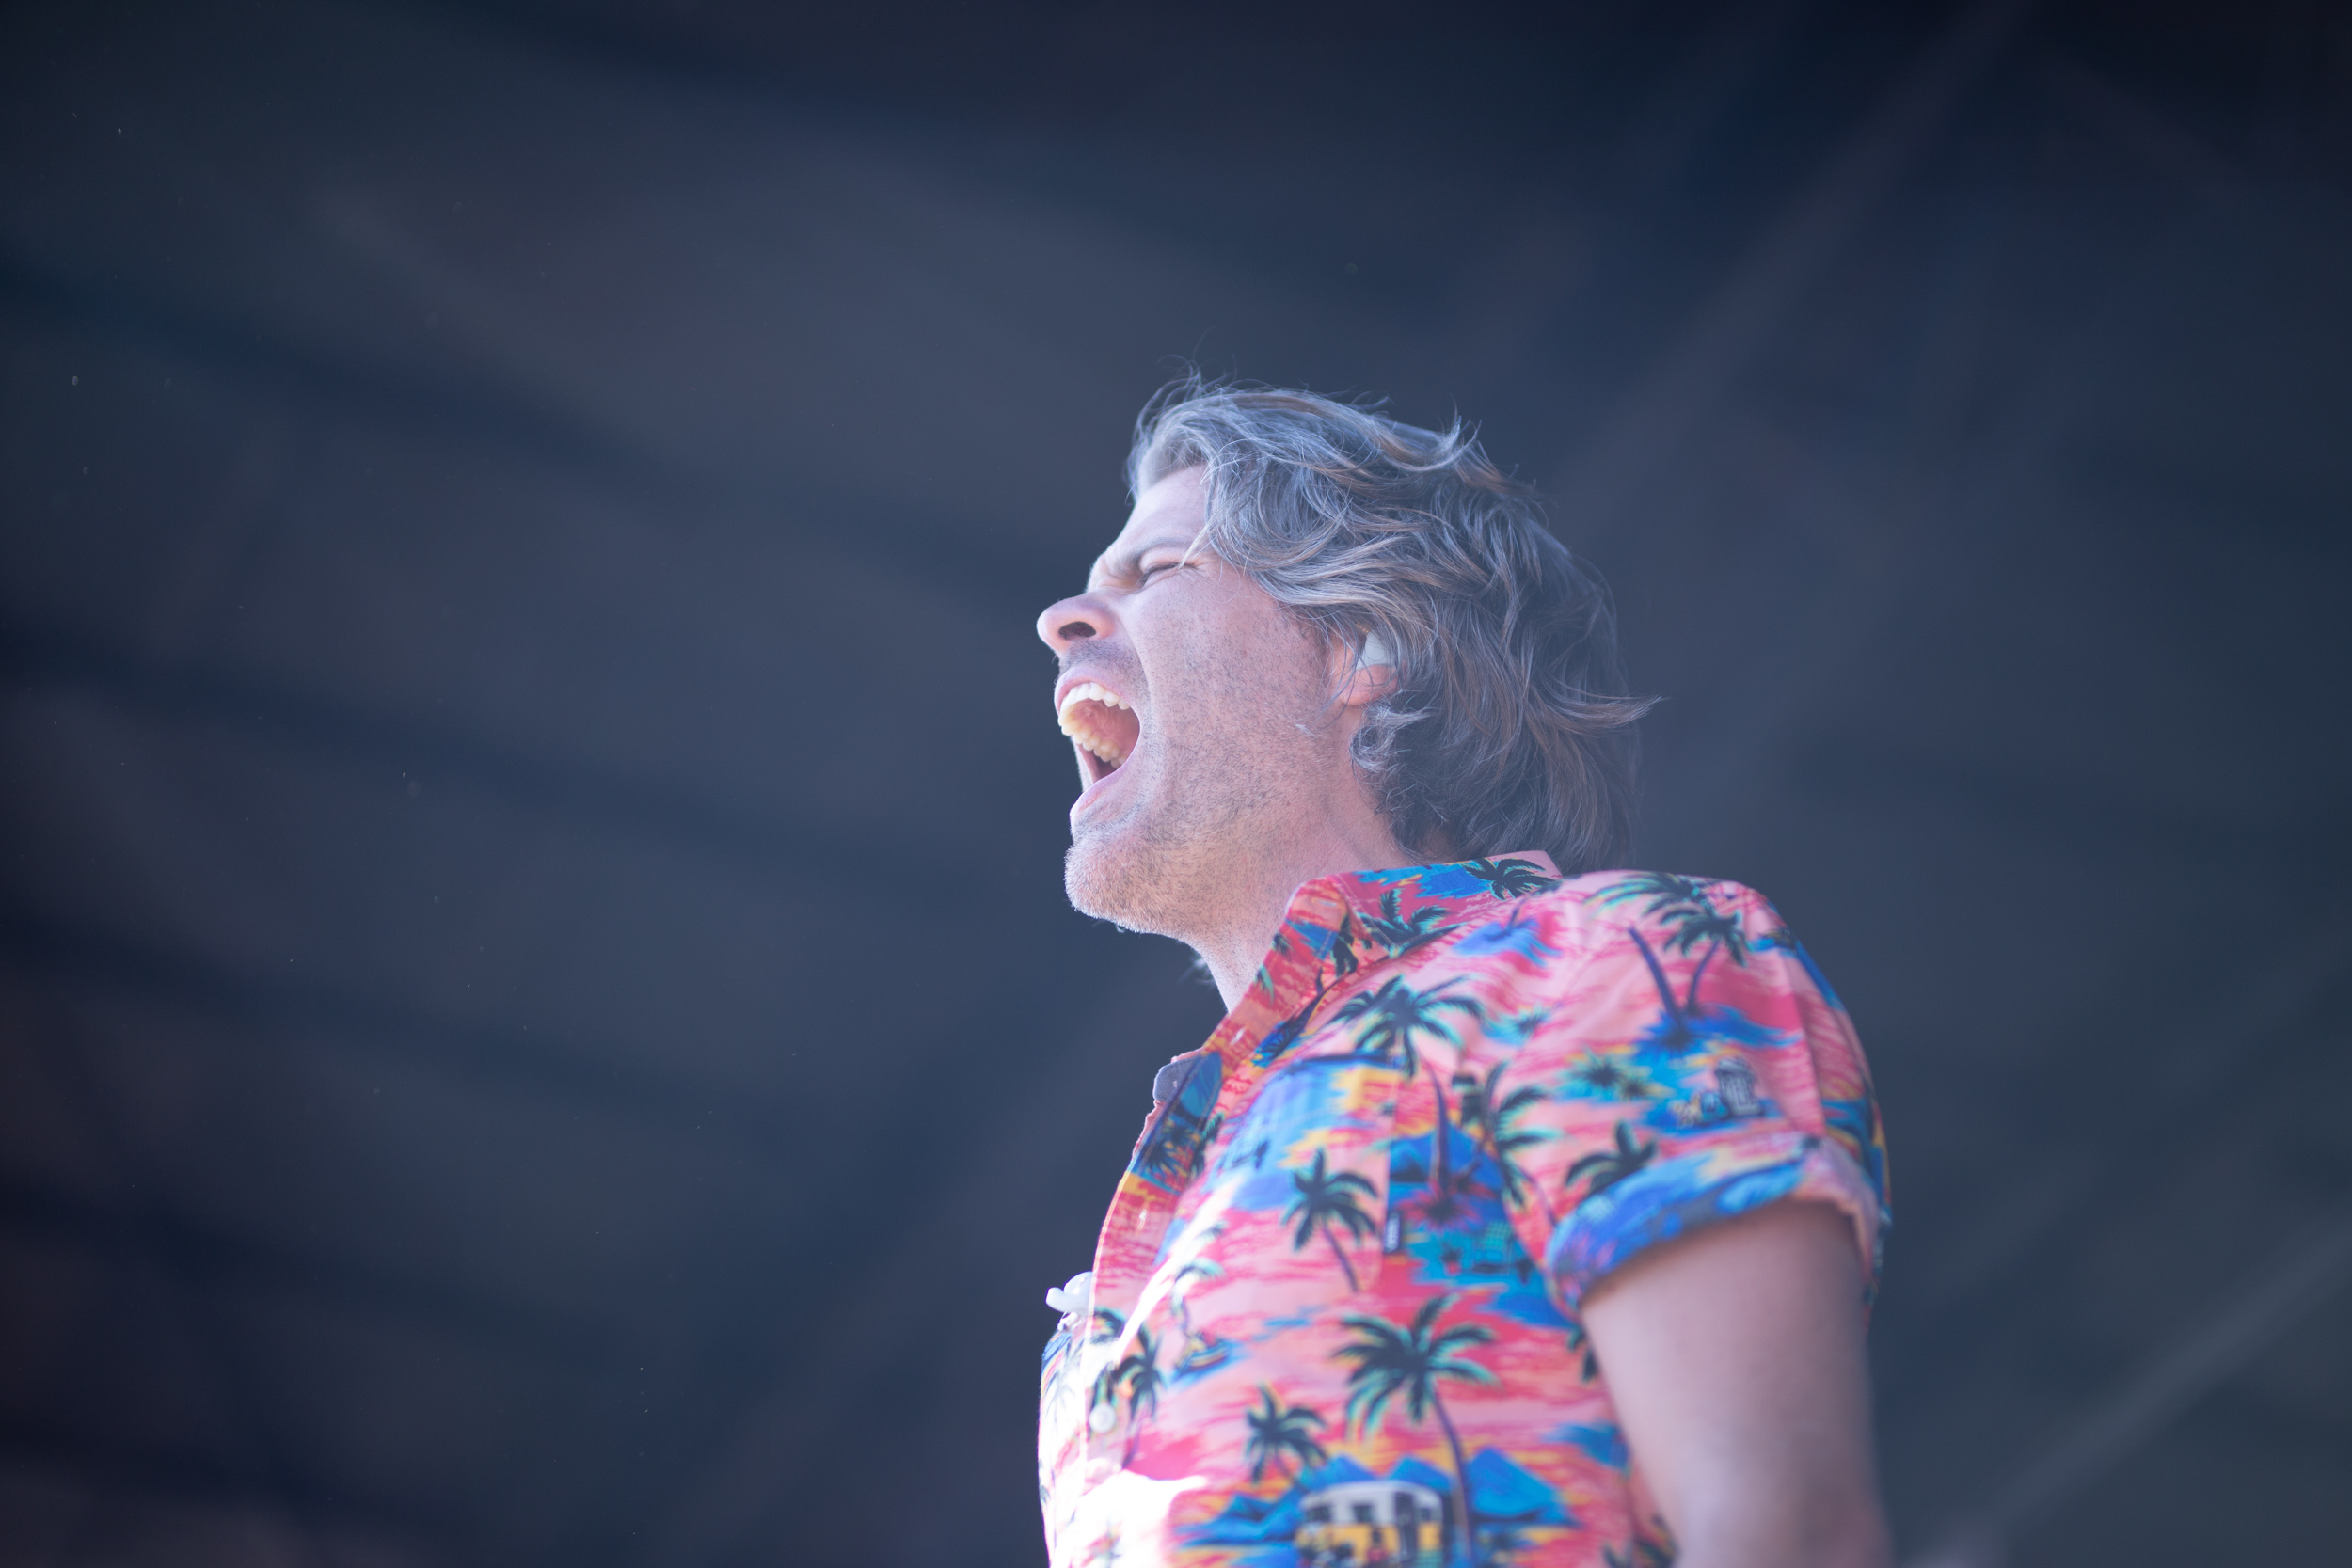 Sean of 3OH!3 at Warped Tour 2018 - Unedited